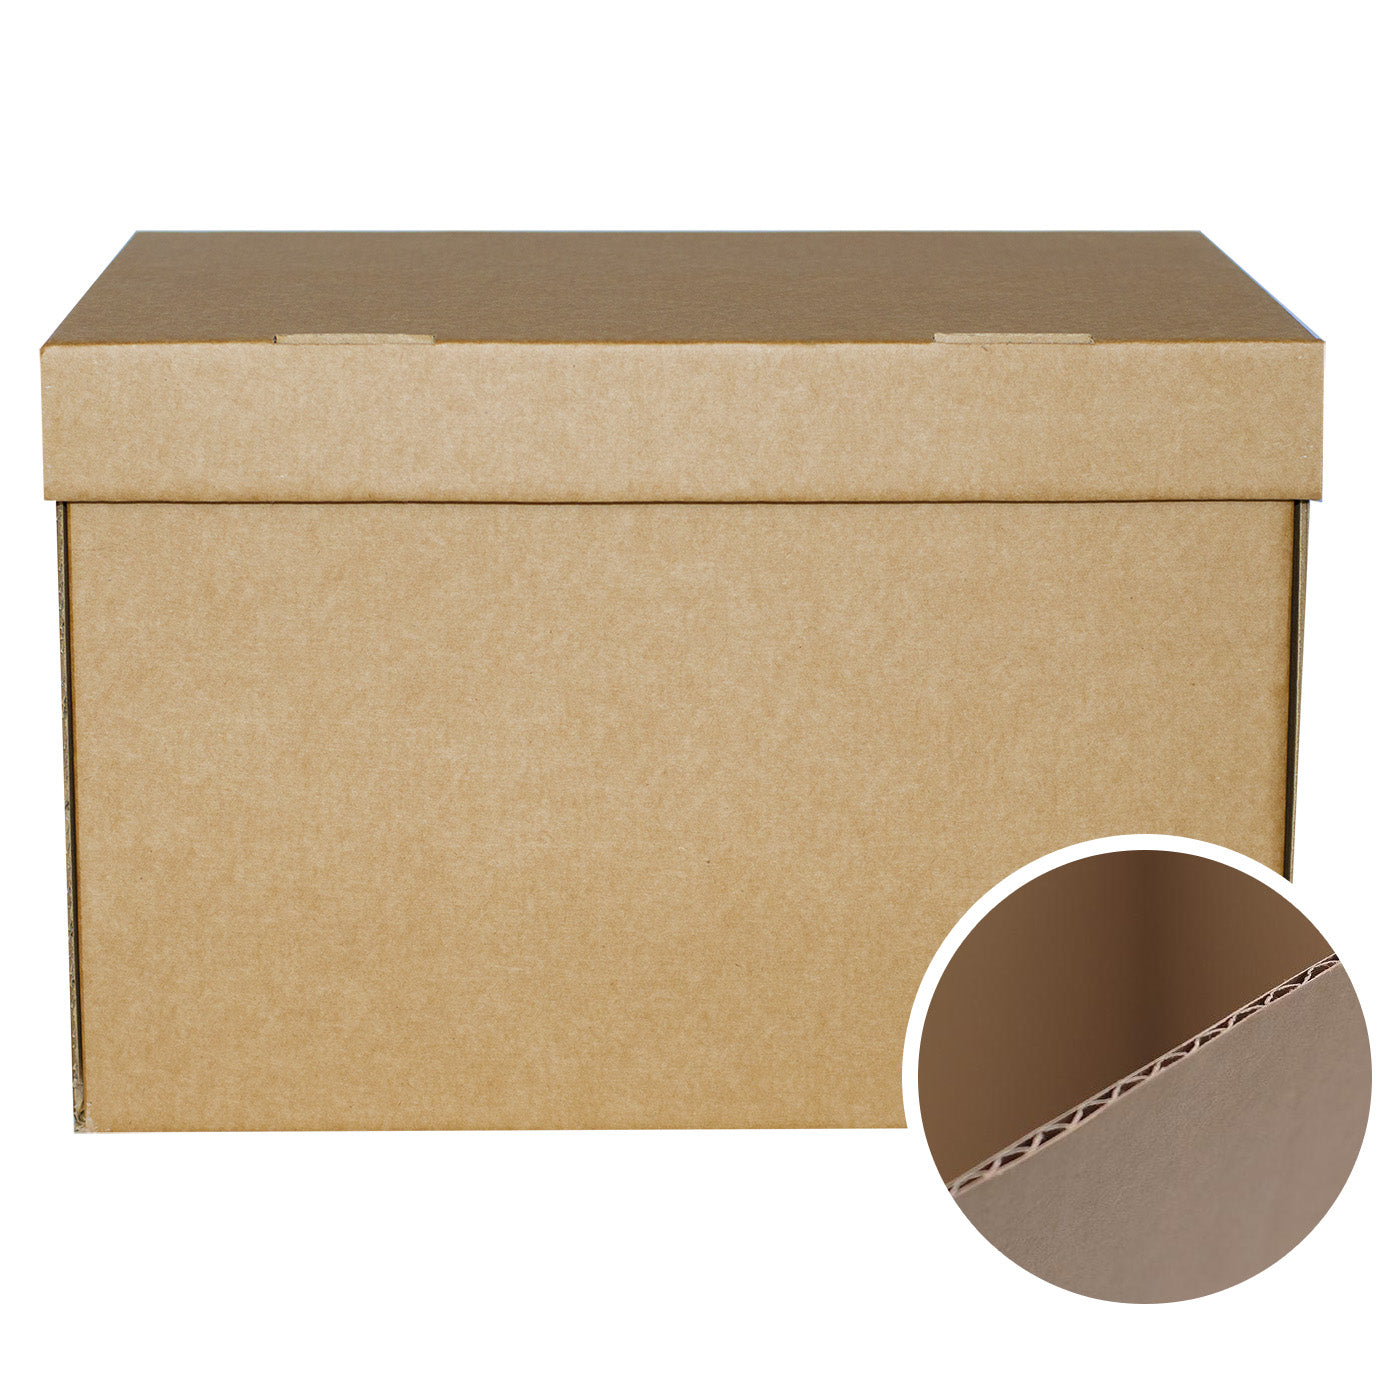 Archive Cardboard Filing Storage Boxes 15x12x9" With Hinged Lids